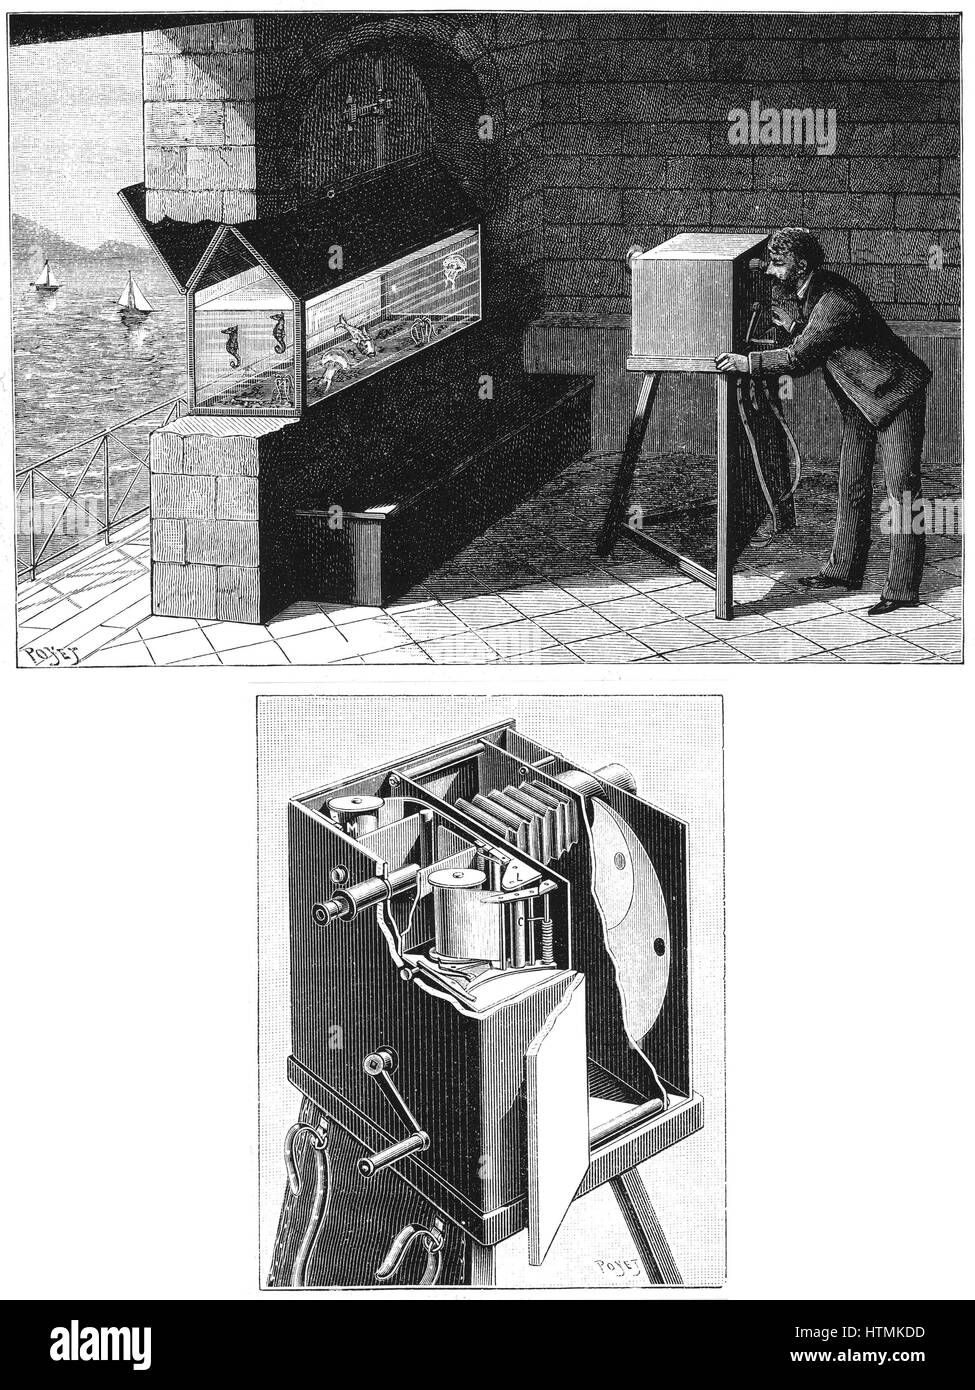 Etienne Jules Marey's (1830-1903) chambre chrono-photographique, the first cine-camera, being used to study movement of creatures in aquarium (top). Below, camera detail, showing ribbon of light-sensitive paper by either Eastman or Balagny. Engraving pub Stock Photo